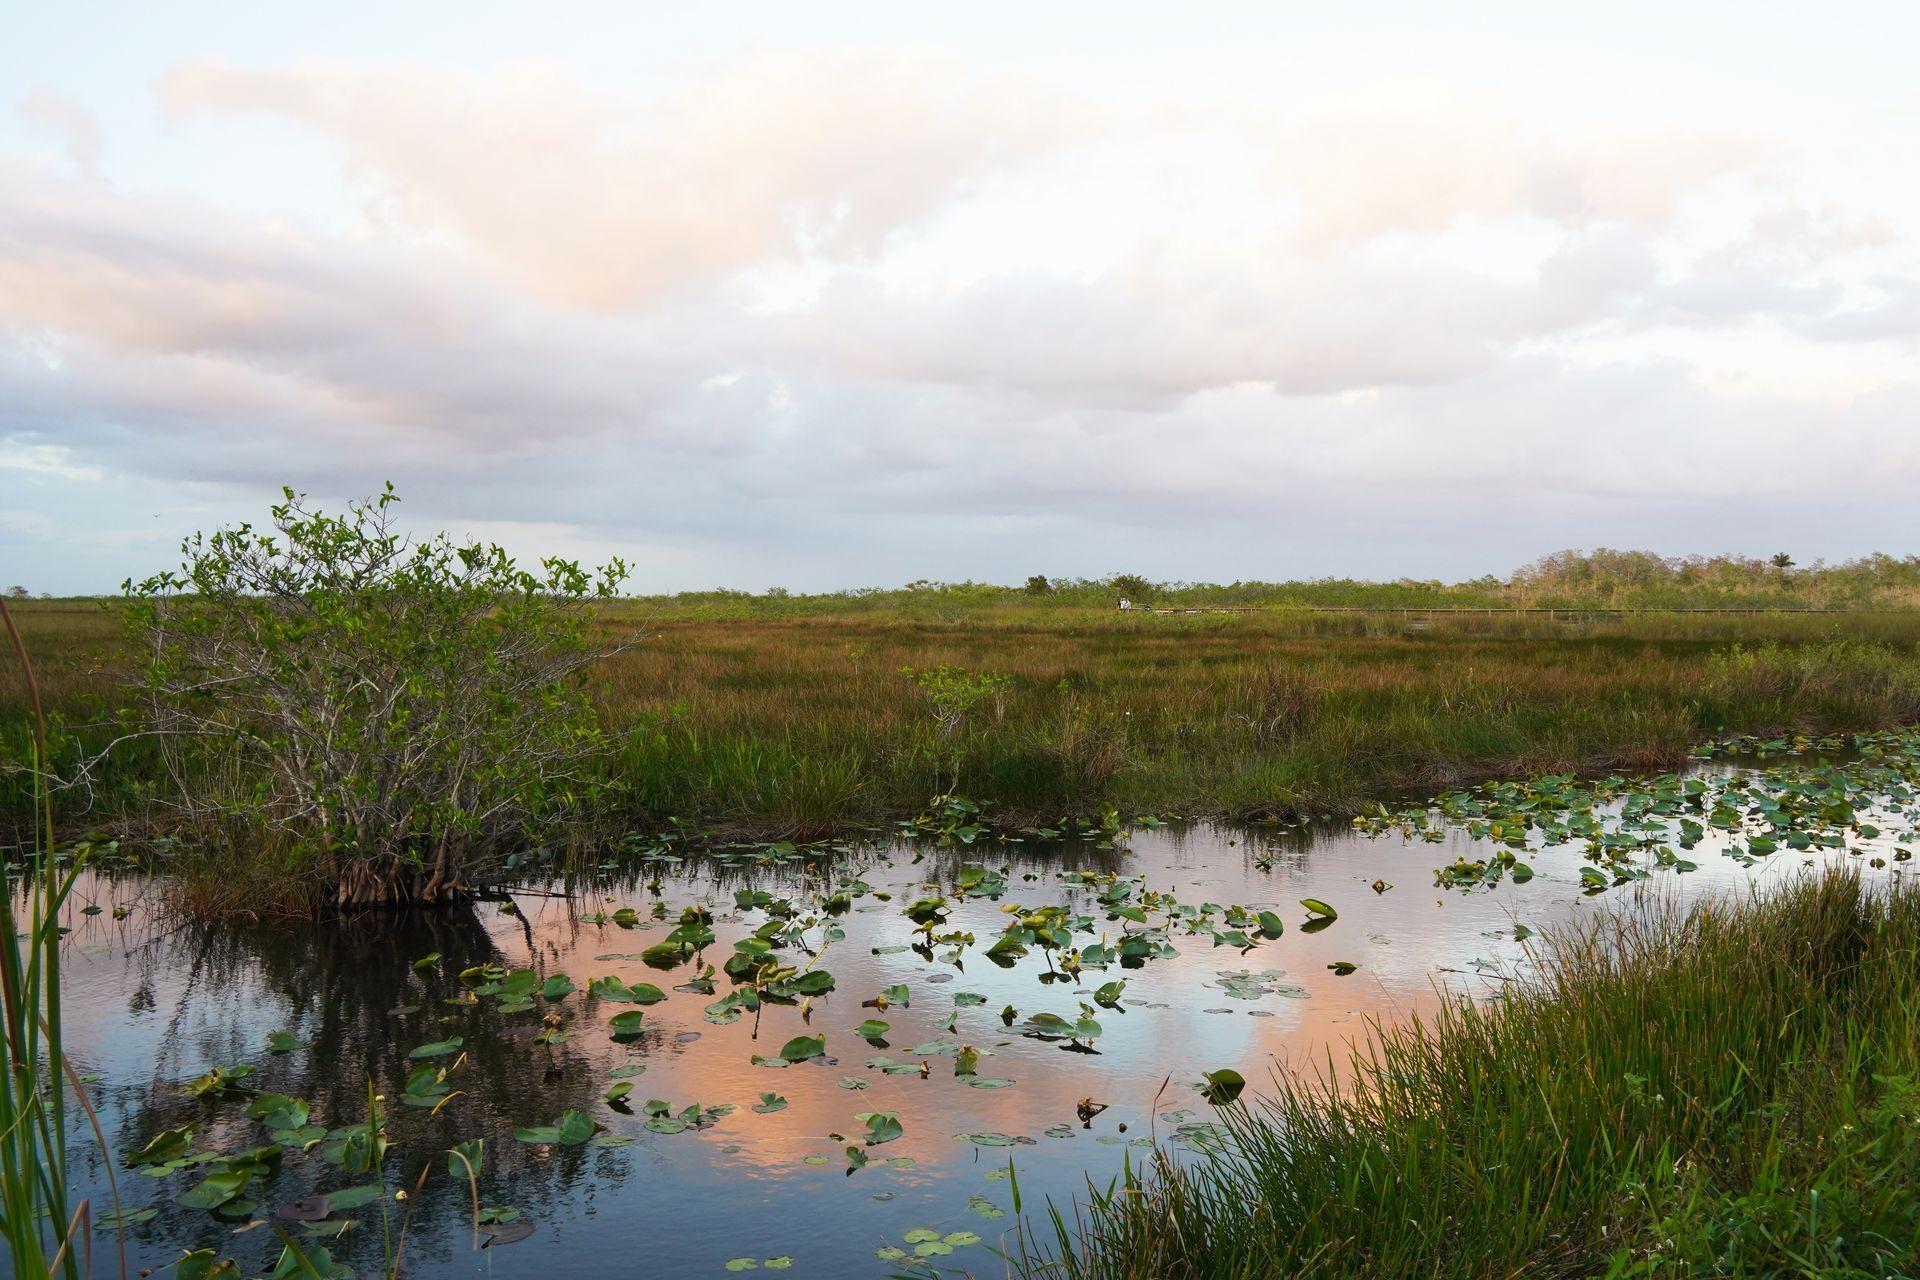 The sun setting over the Everglades grasslands and a pond on the Anhinga Trail. Orange clouds are reflecting down on the water